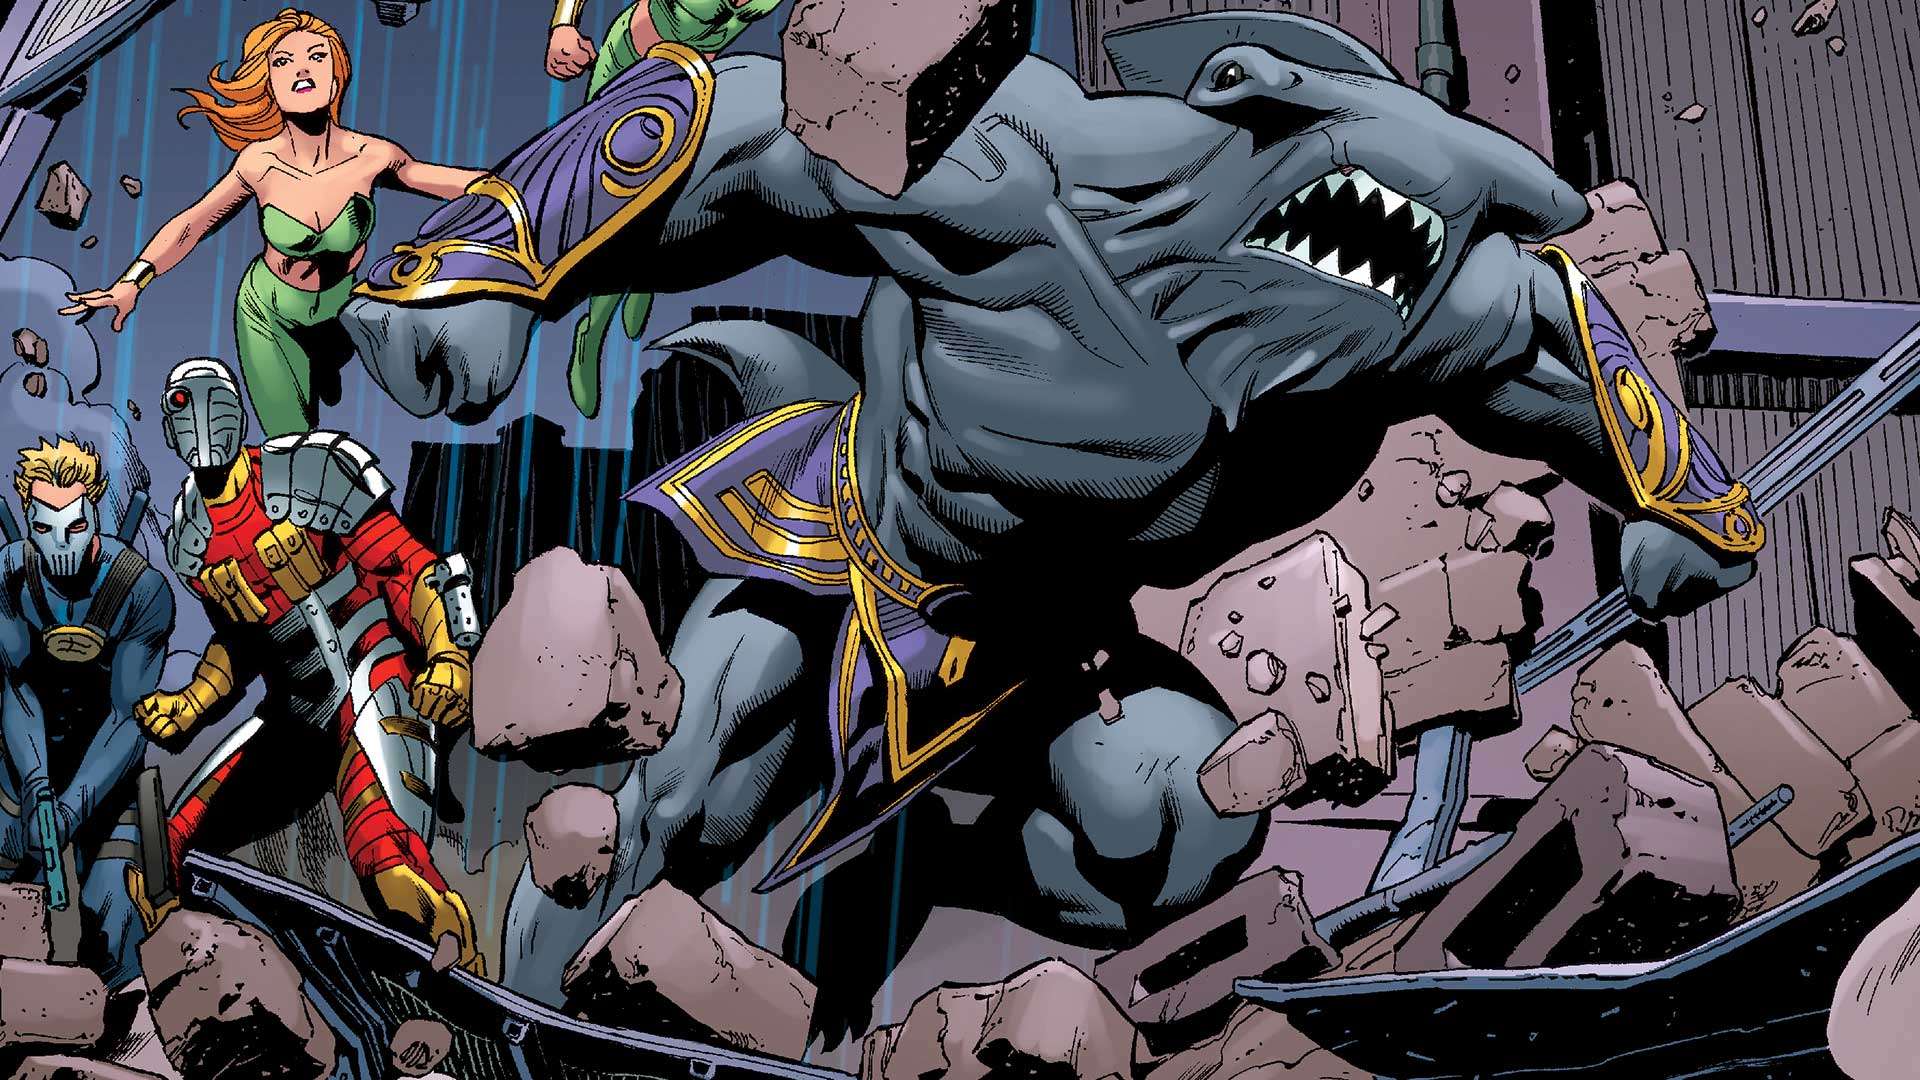 King Shark’s history with DC